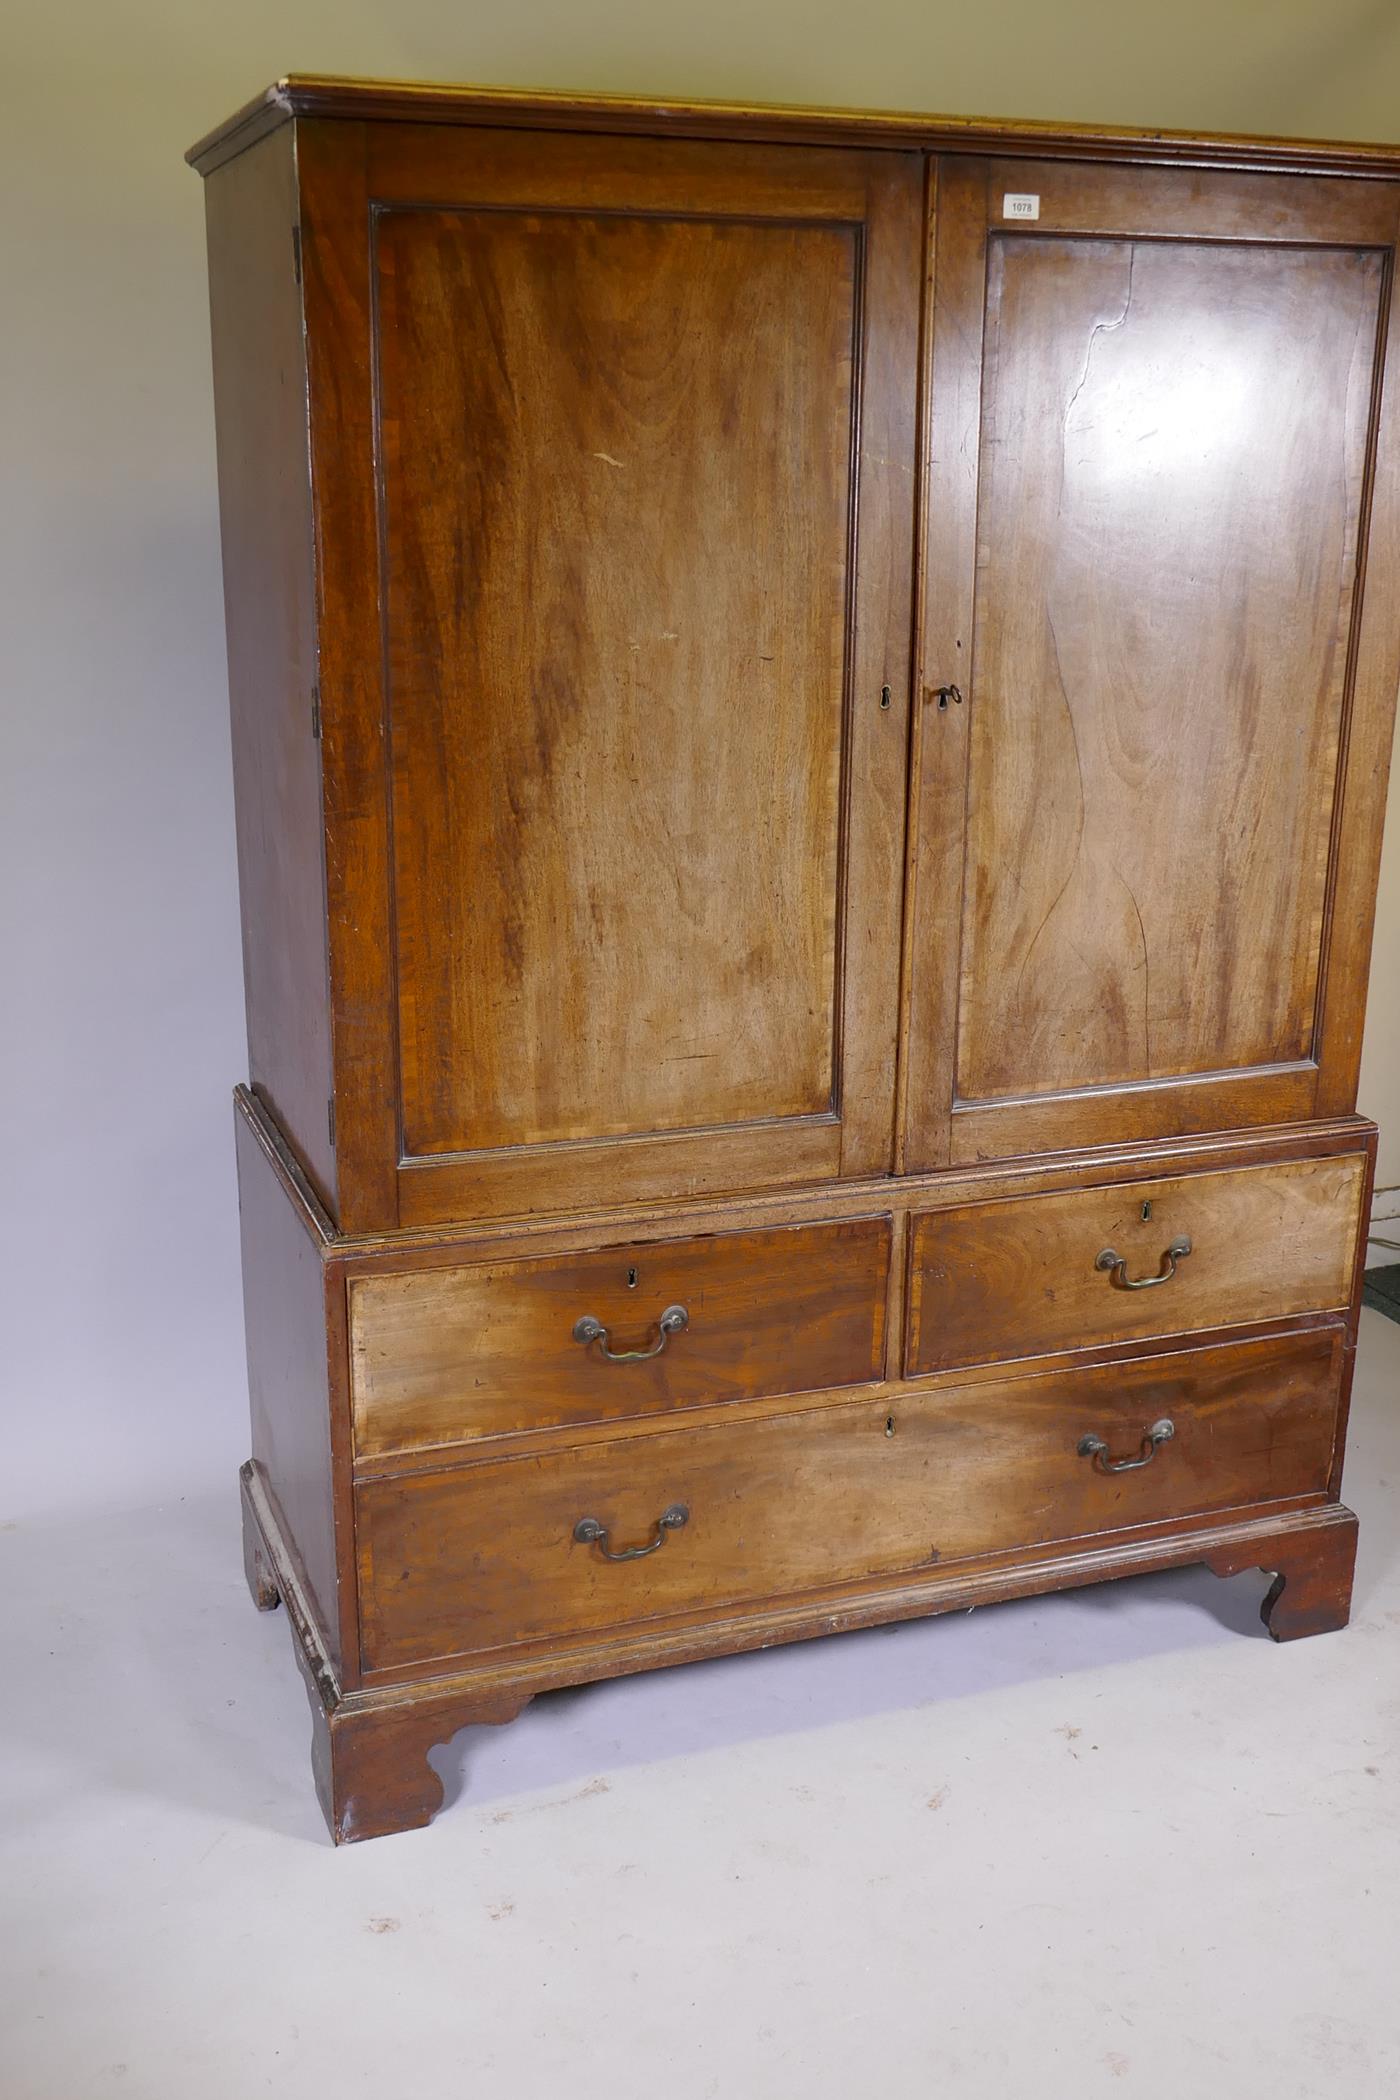 A George III mahogany linen press of small proportions, the doors and drawers with crossbanded inlay - Image 2 of 6